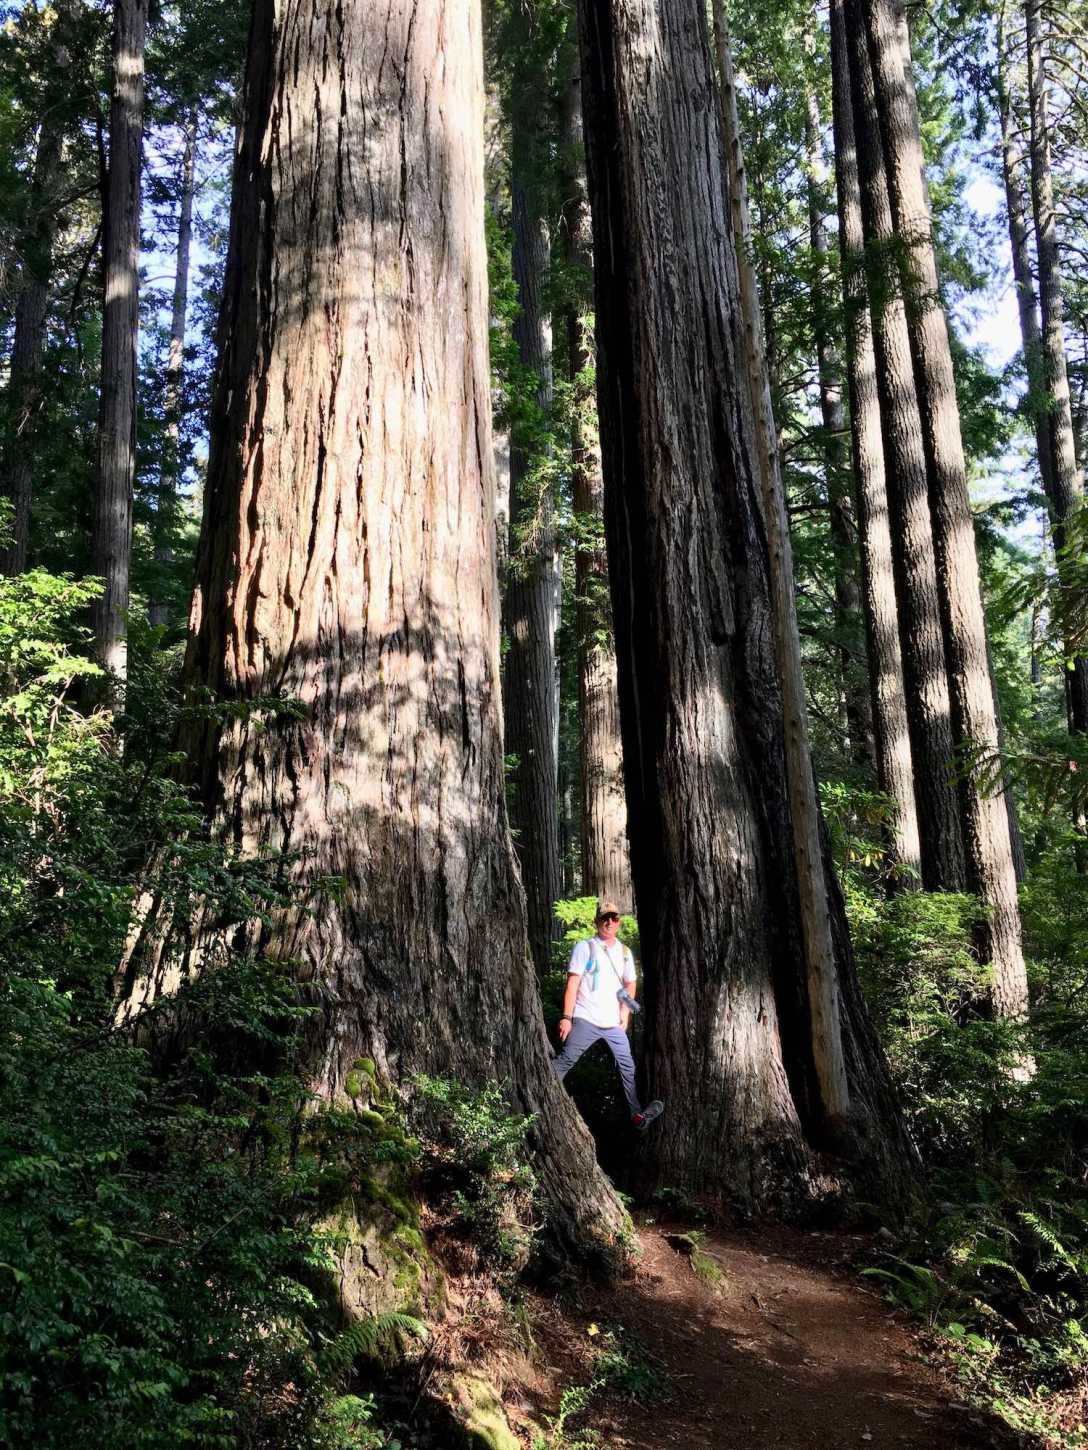 Robert amongst the giant Redwoods along Damnation Creek Trail in Del Norte Coast Redwoods State Park